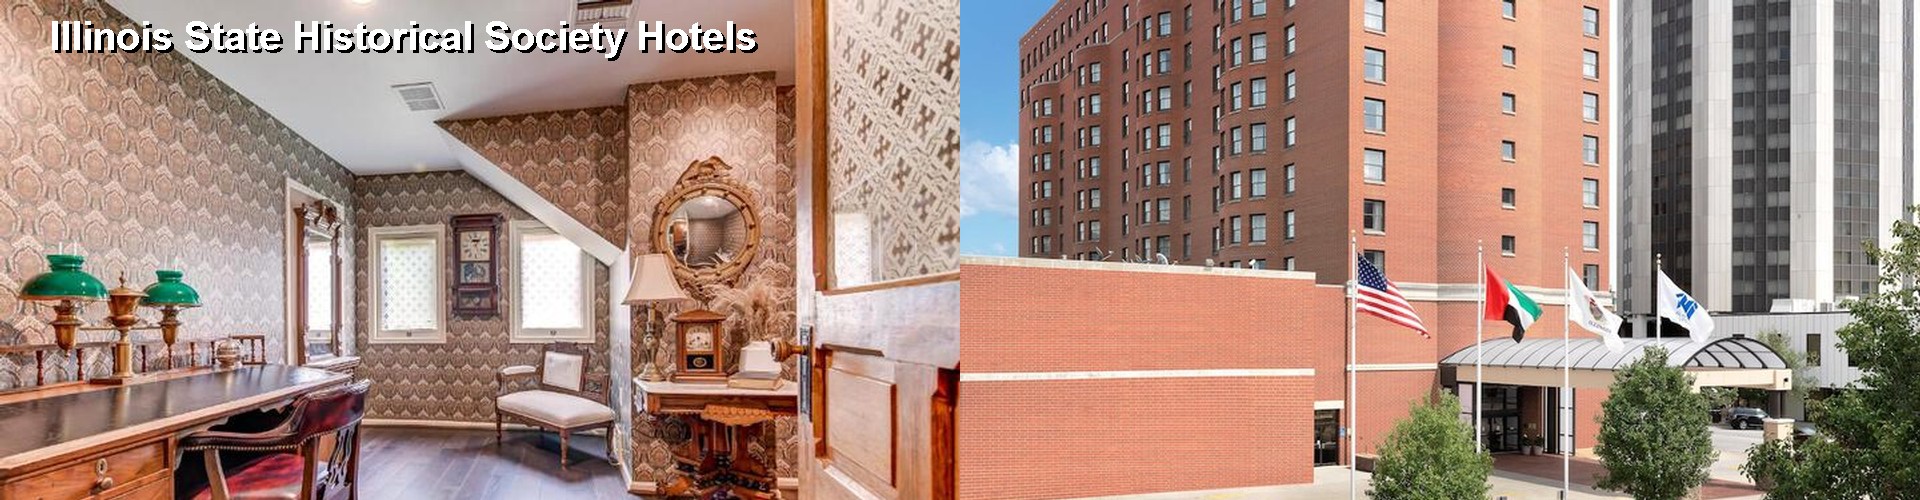 5 Best Hotels near Illinois State Historical Society